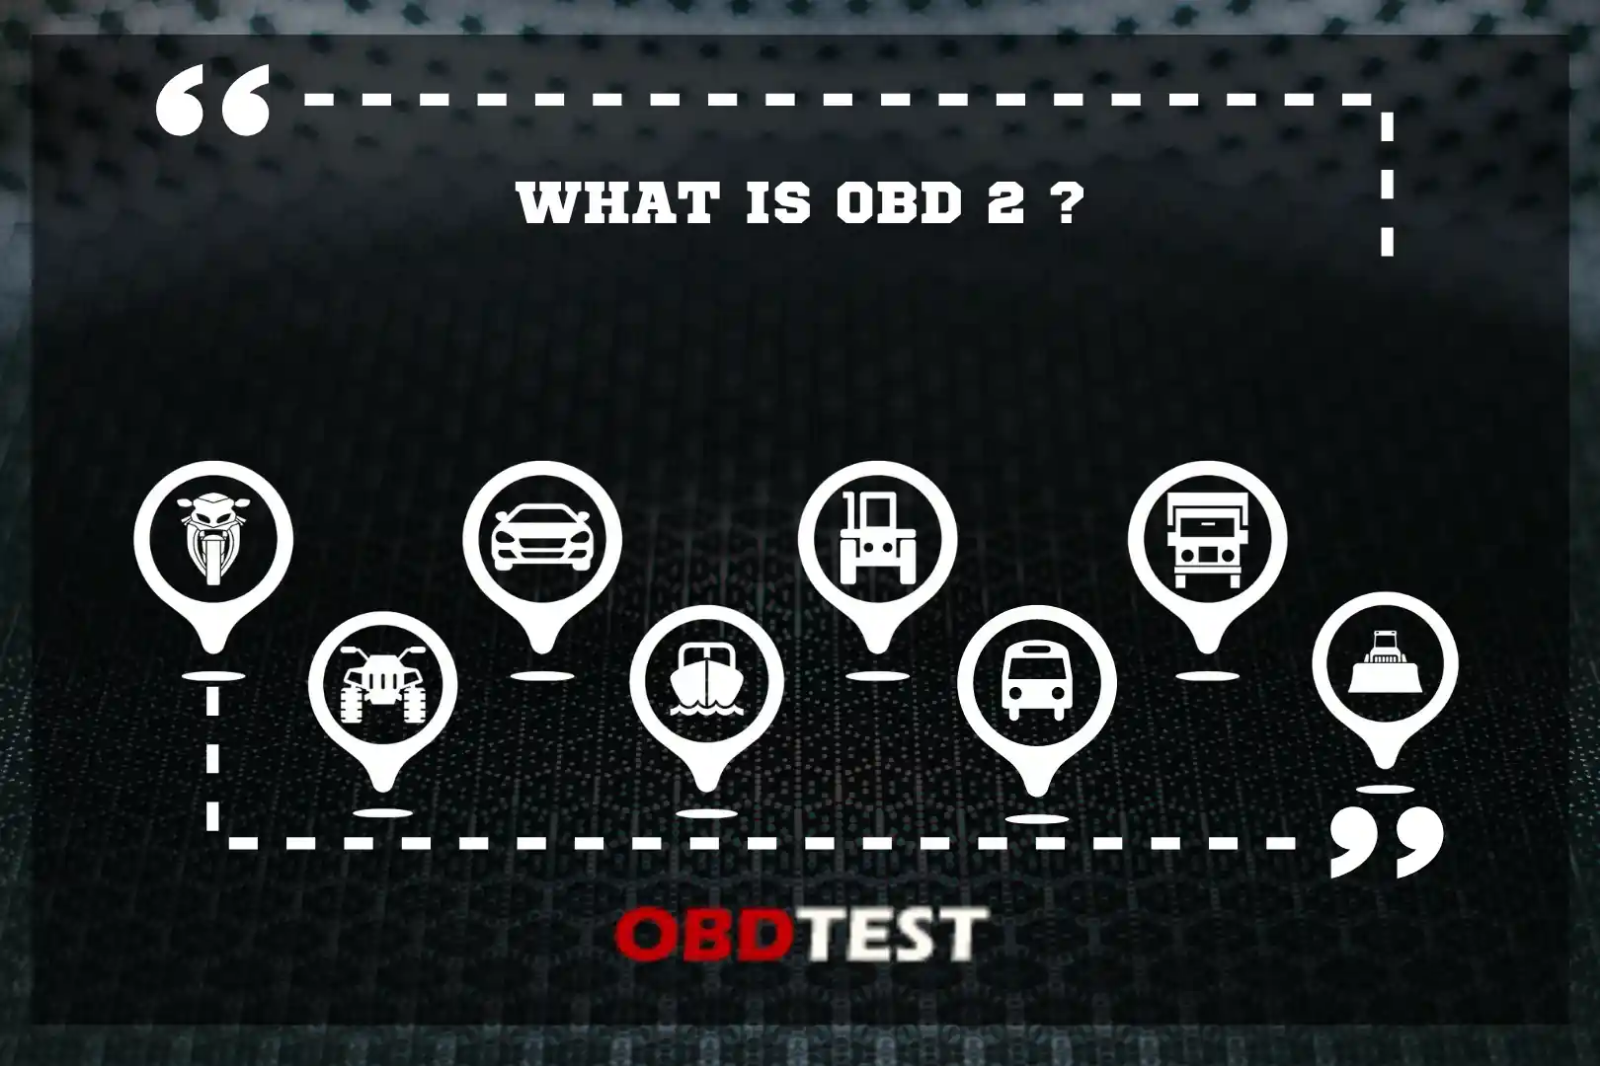 What is OBD2 ?When was OBD2 use firstly?